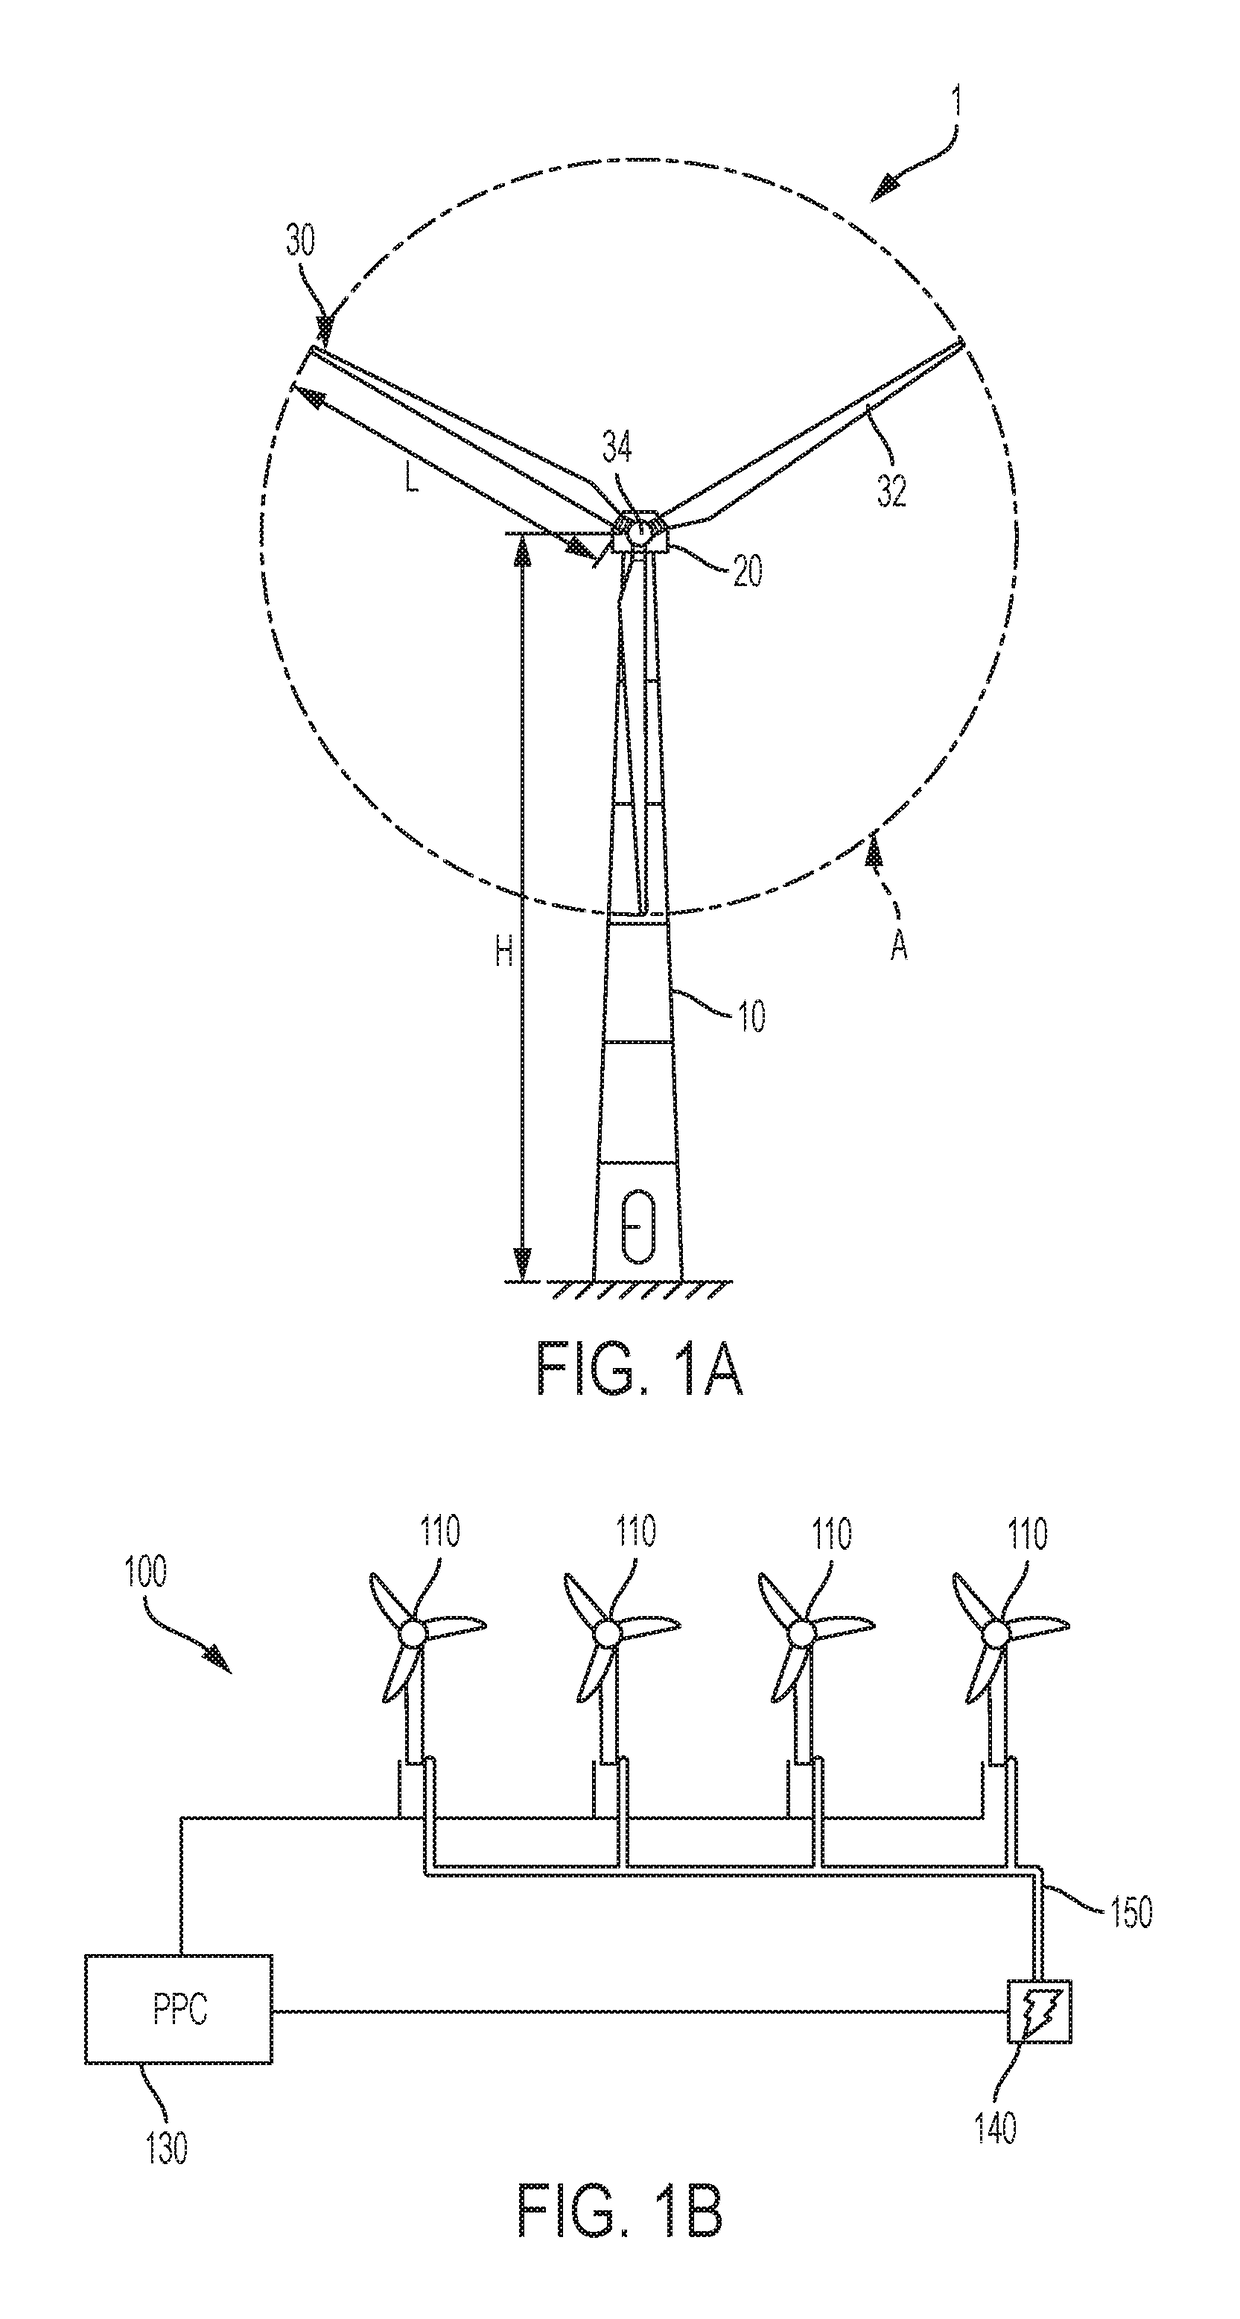 Methods and systems for generating wind turbine control schedules